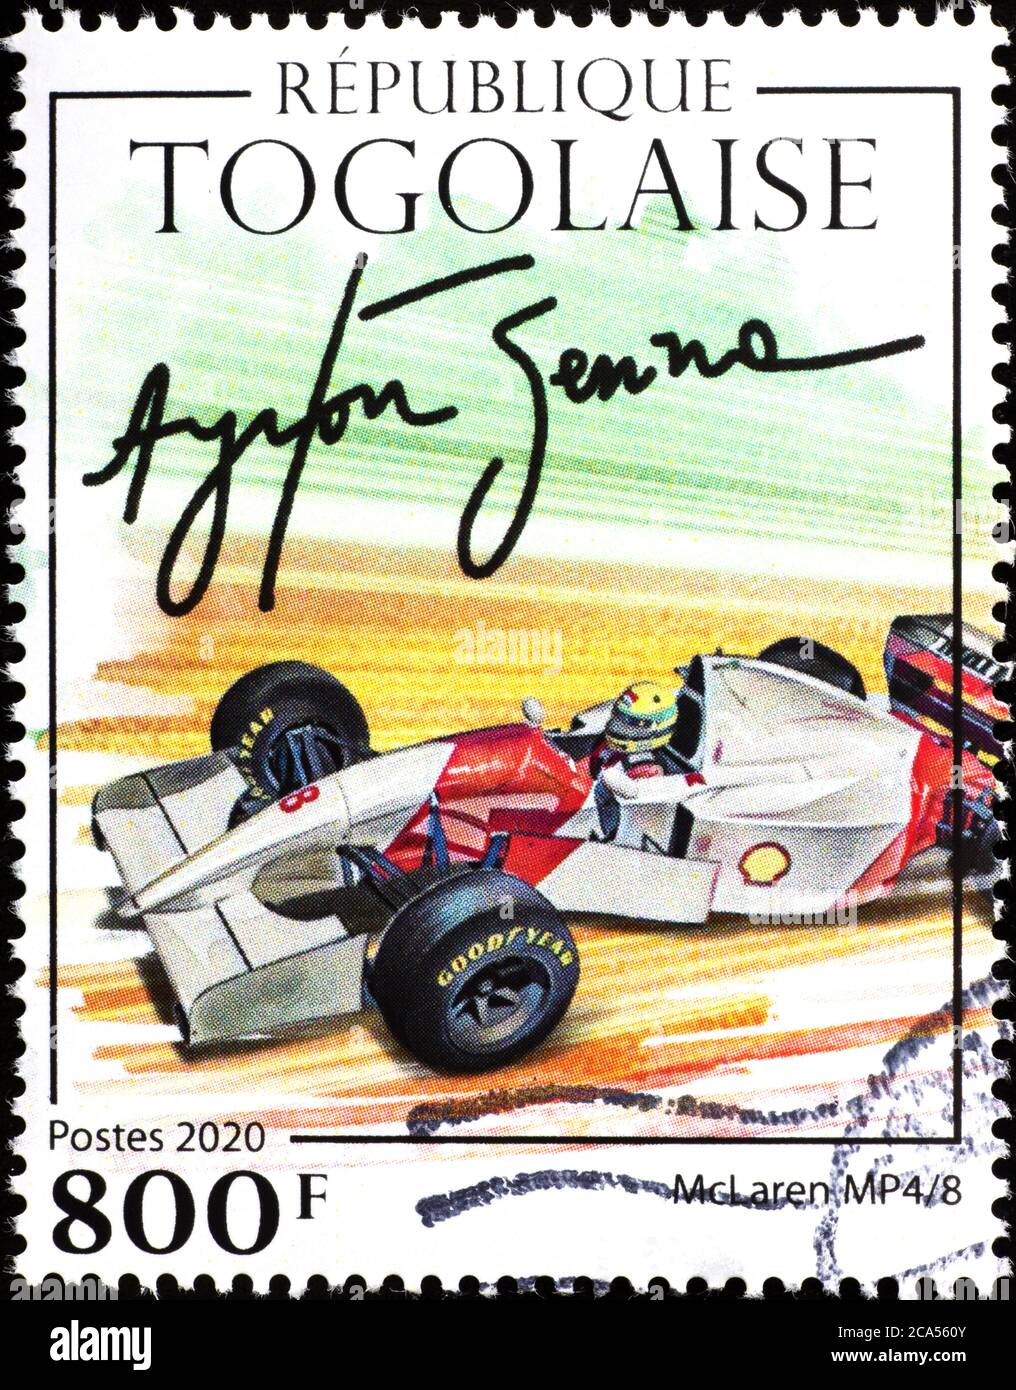 The McLaren driven by Ayrton Senna and his signature on stamp Stock Photo